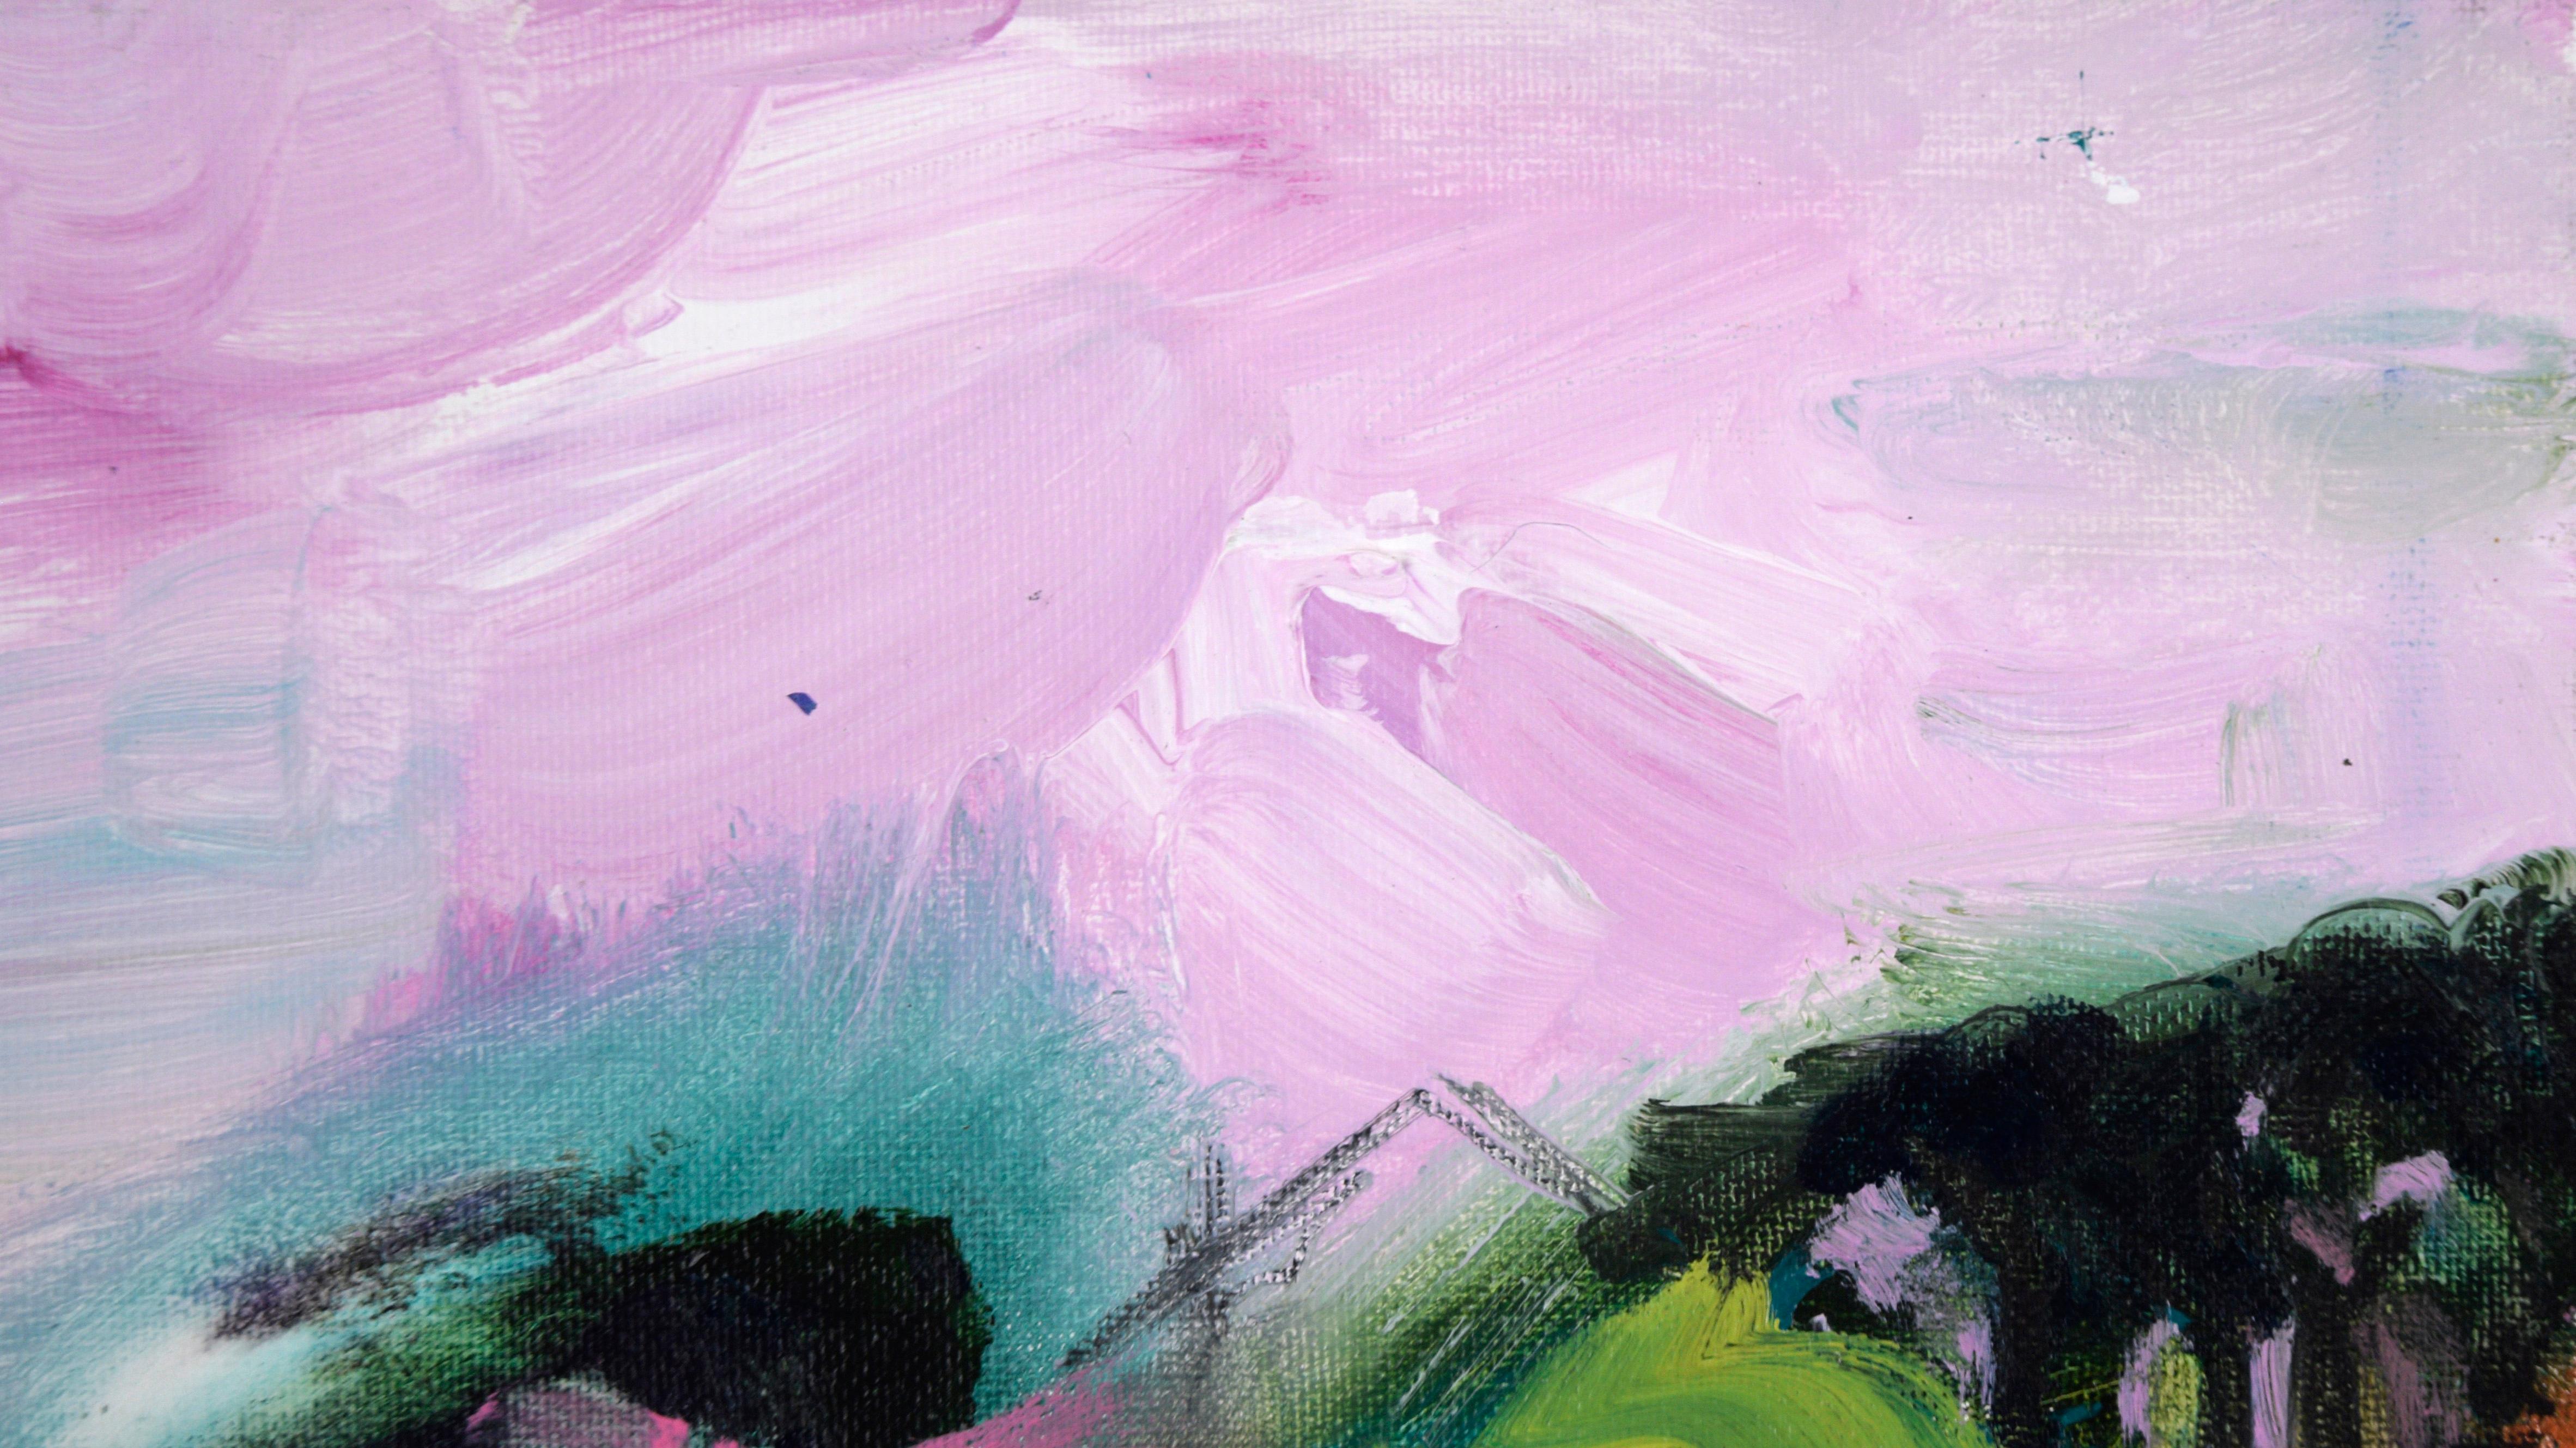 Pink Sky and Magenta Field - Abstracted Landscape in Acrylic on Canvas - Abstract Impressionist Painting by Ilana Ingber